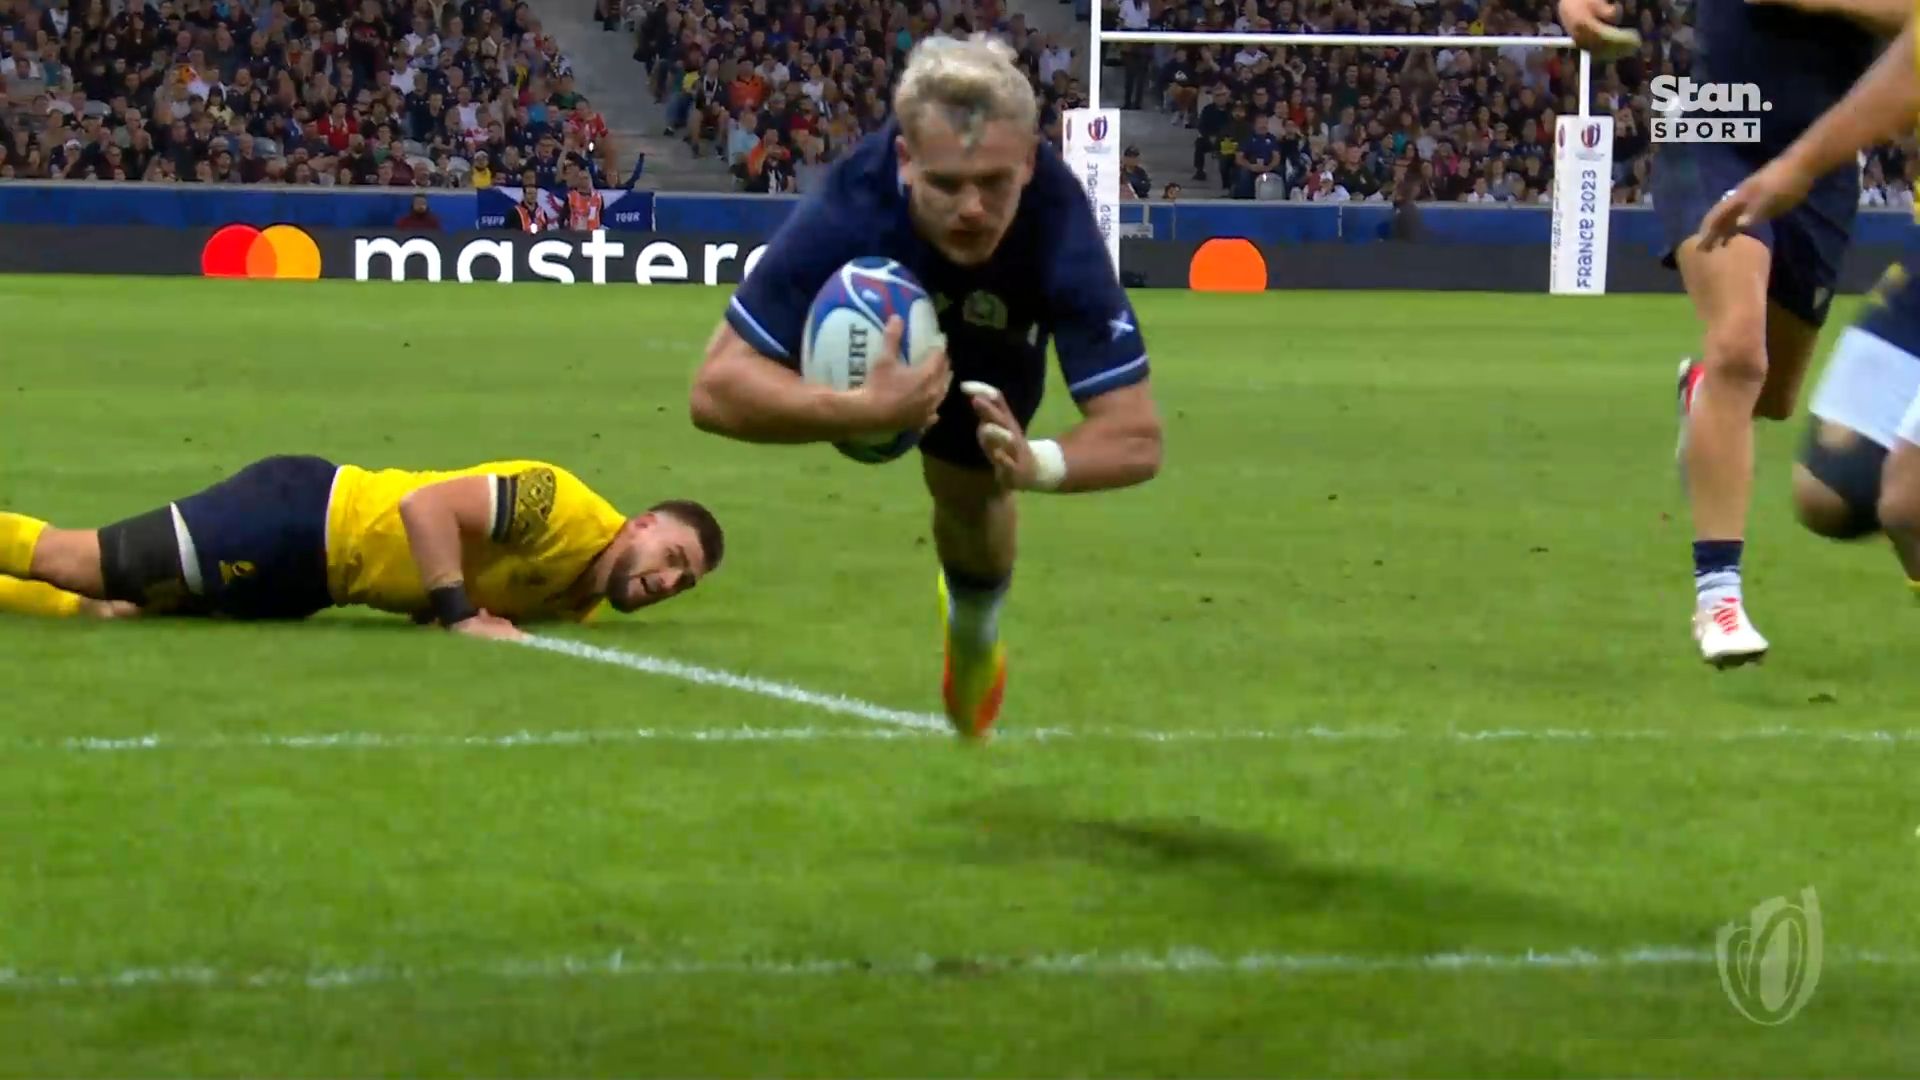 Rugby World Cup highlights: Scotland set up do-or-die clash after Romania rampage